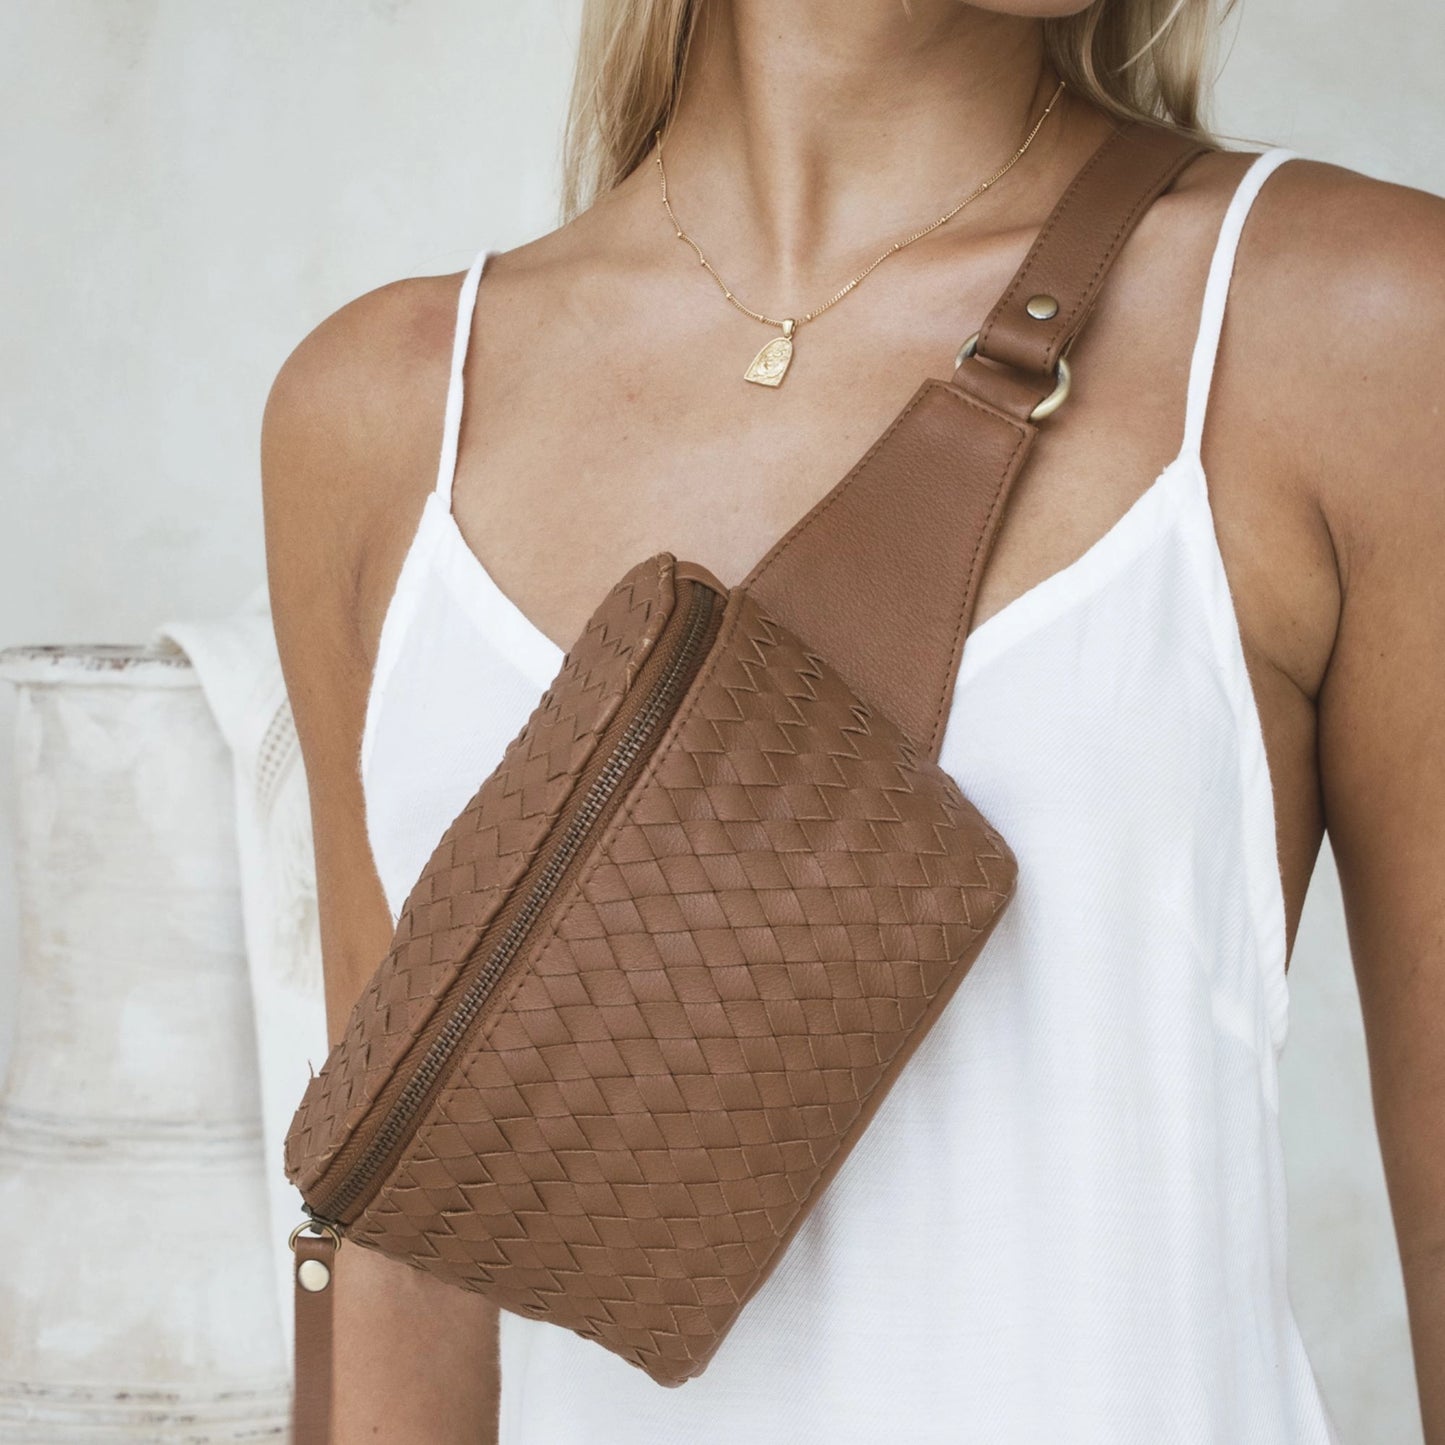 woven remy fanny pack - tan